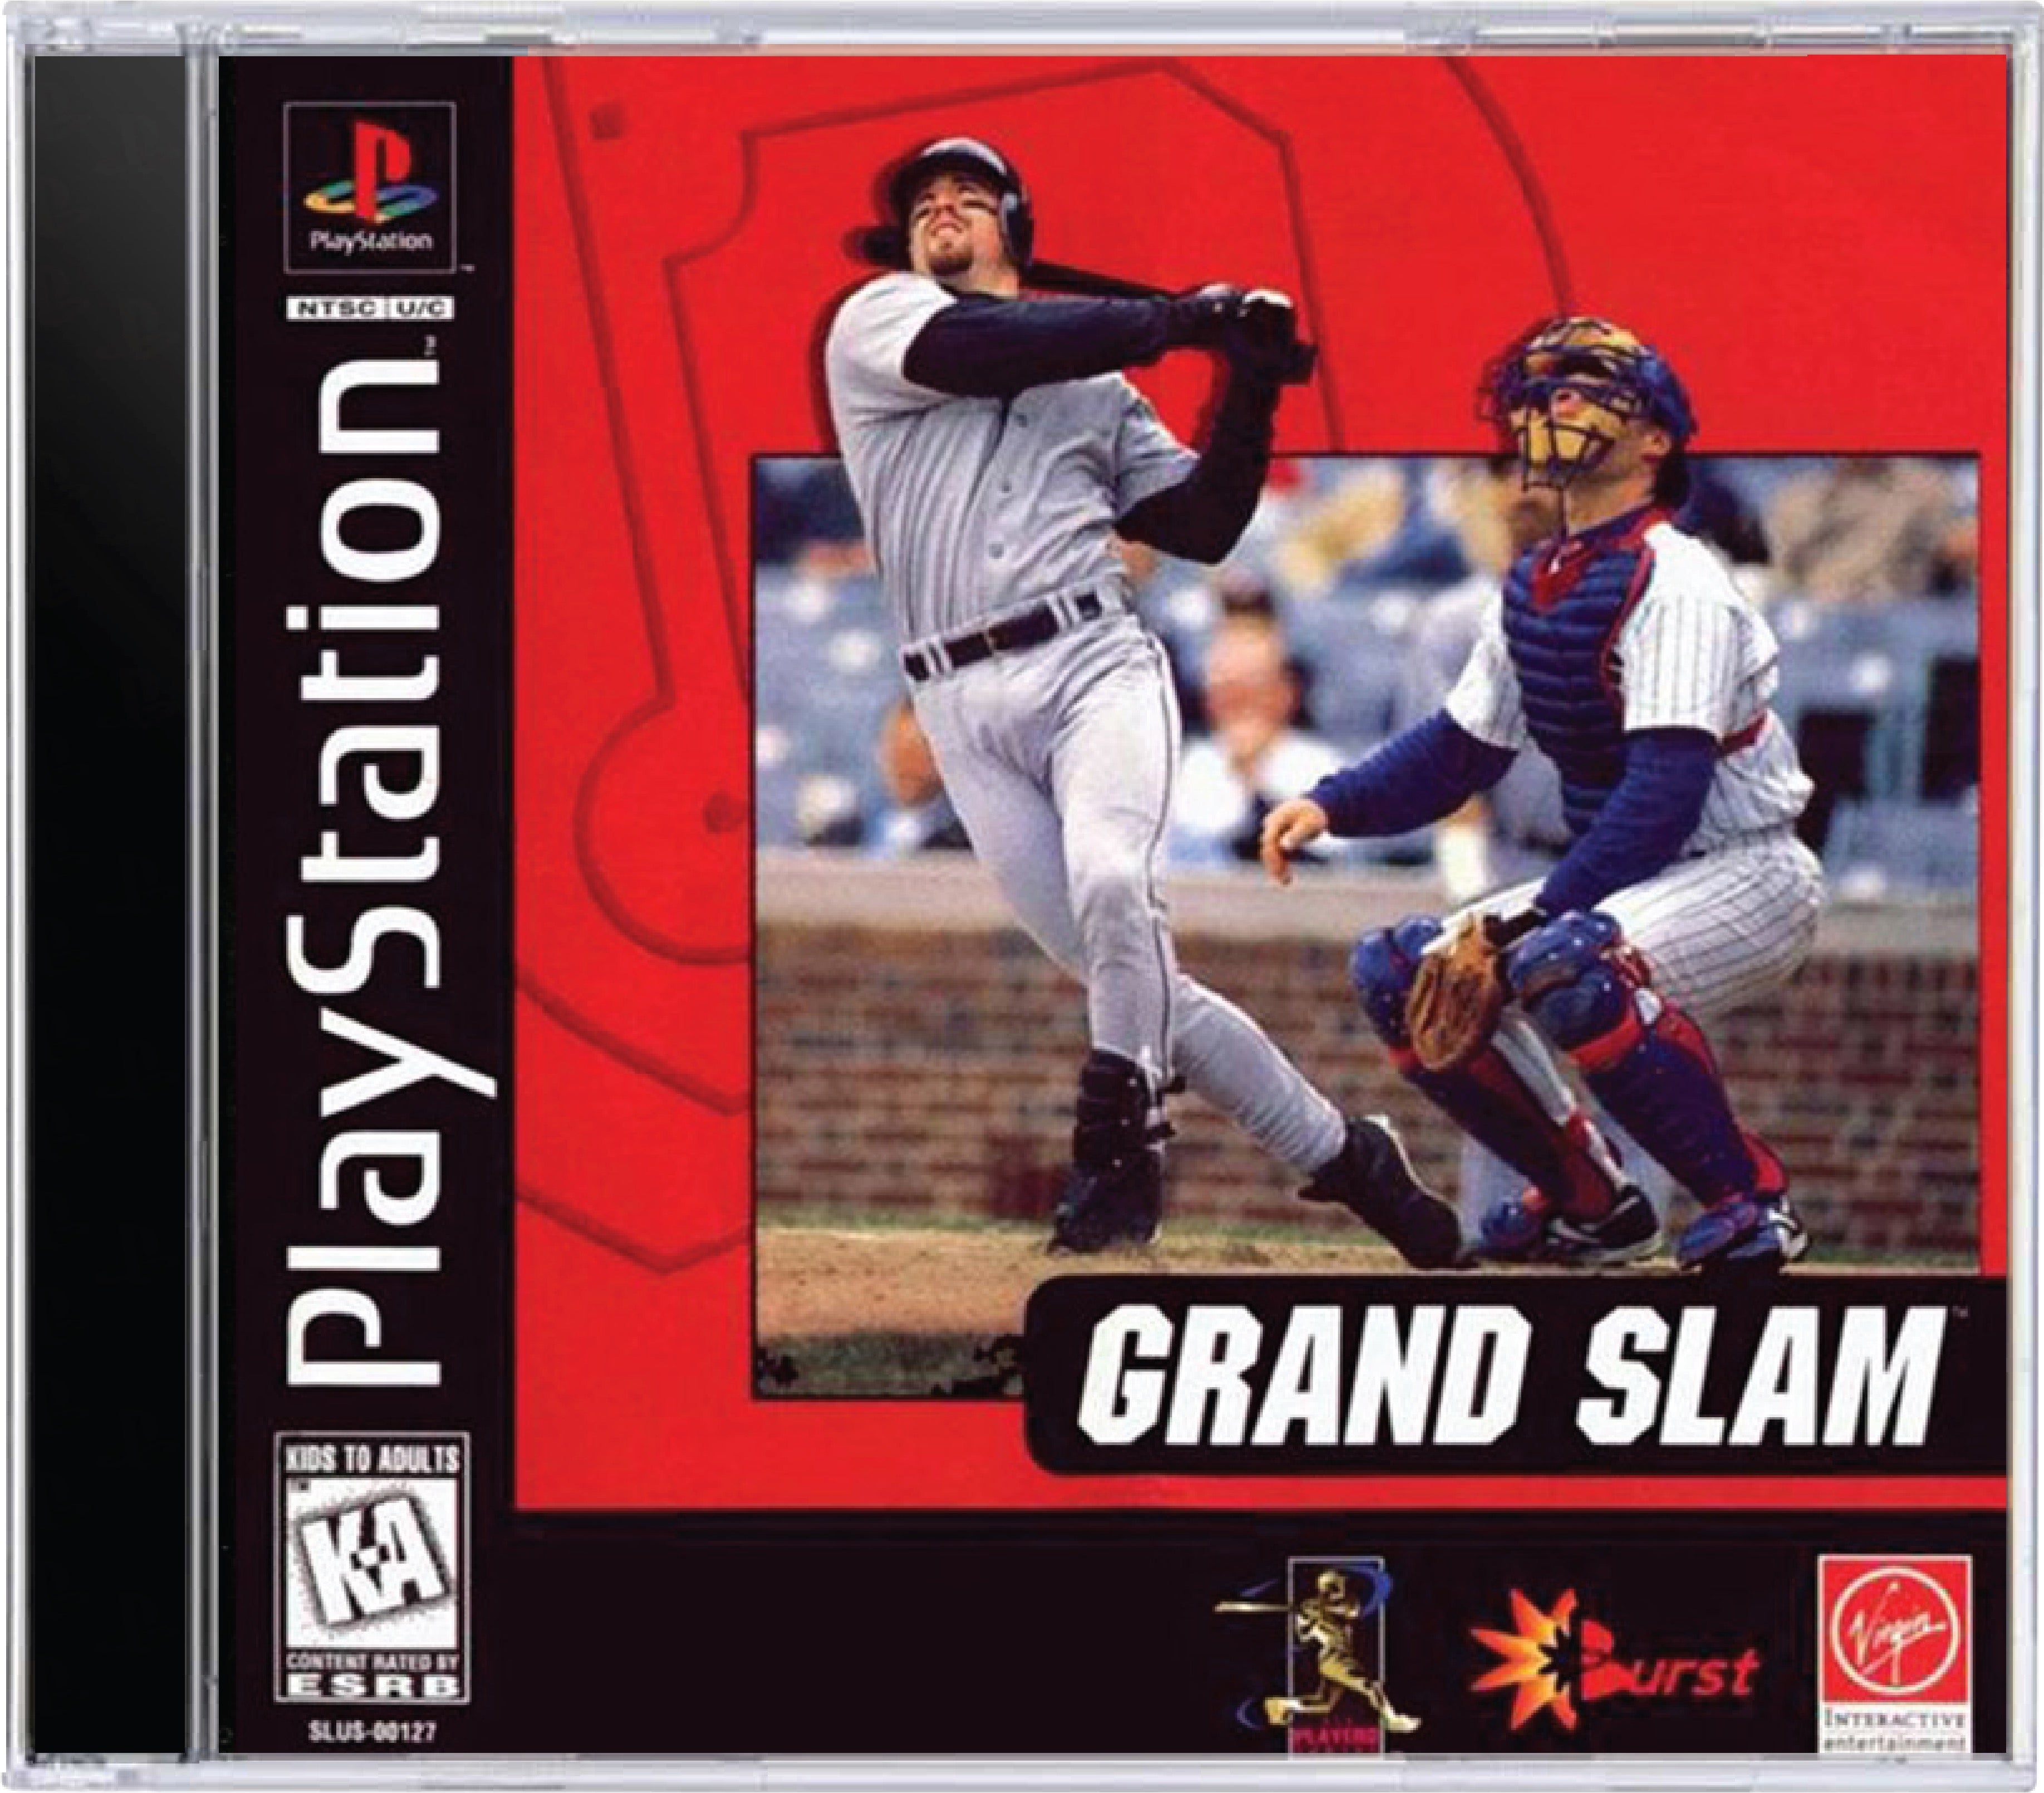 Grand Slam Cover Art and Product Photo